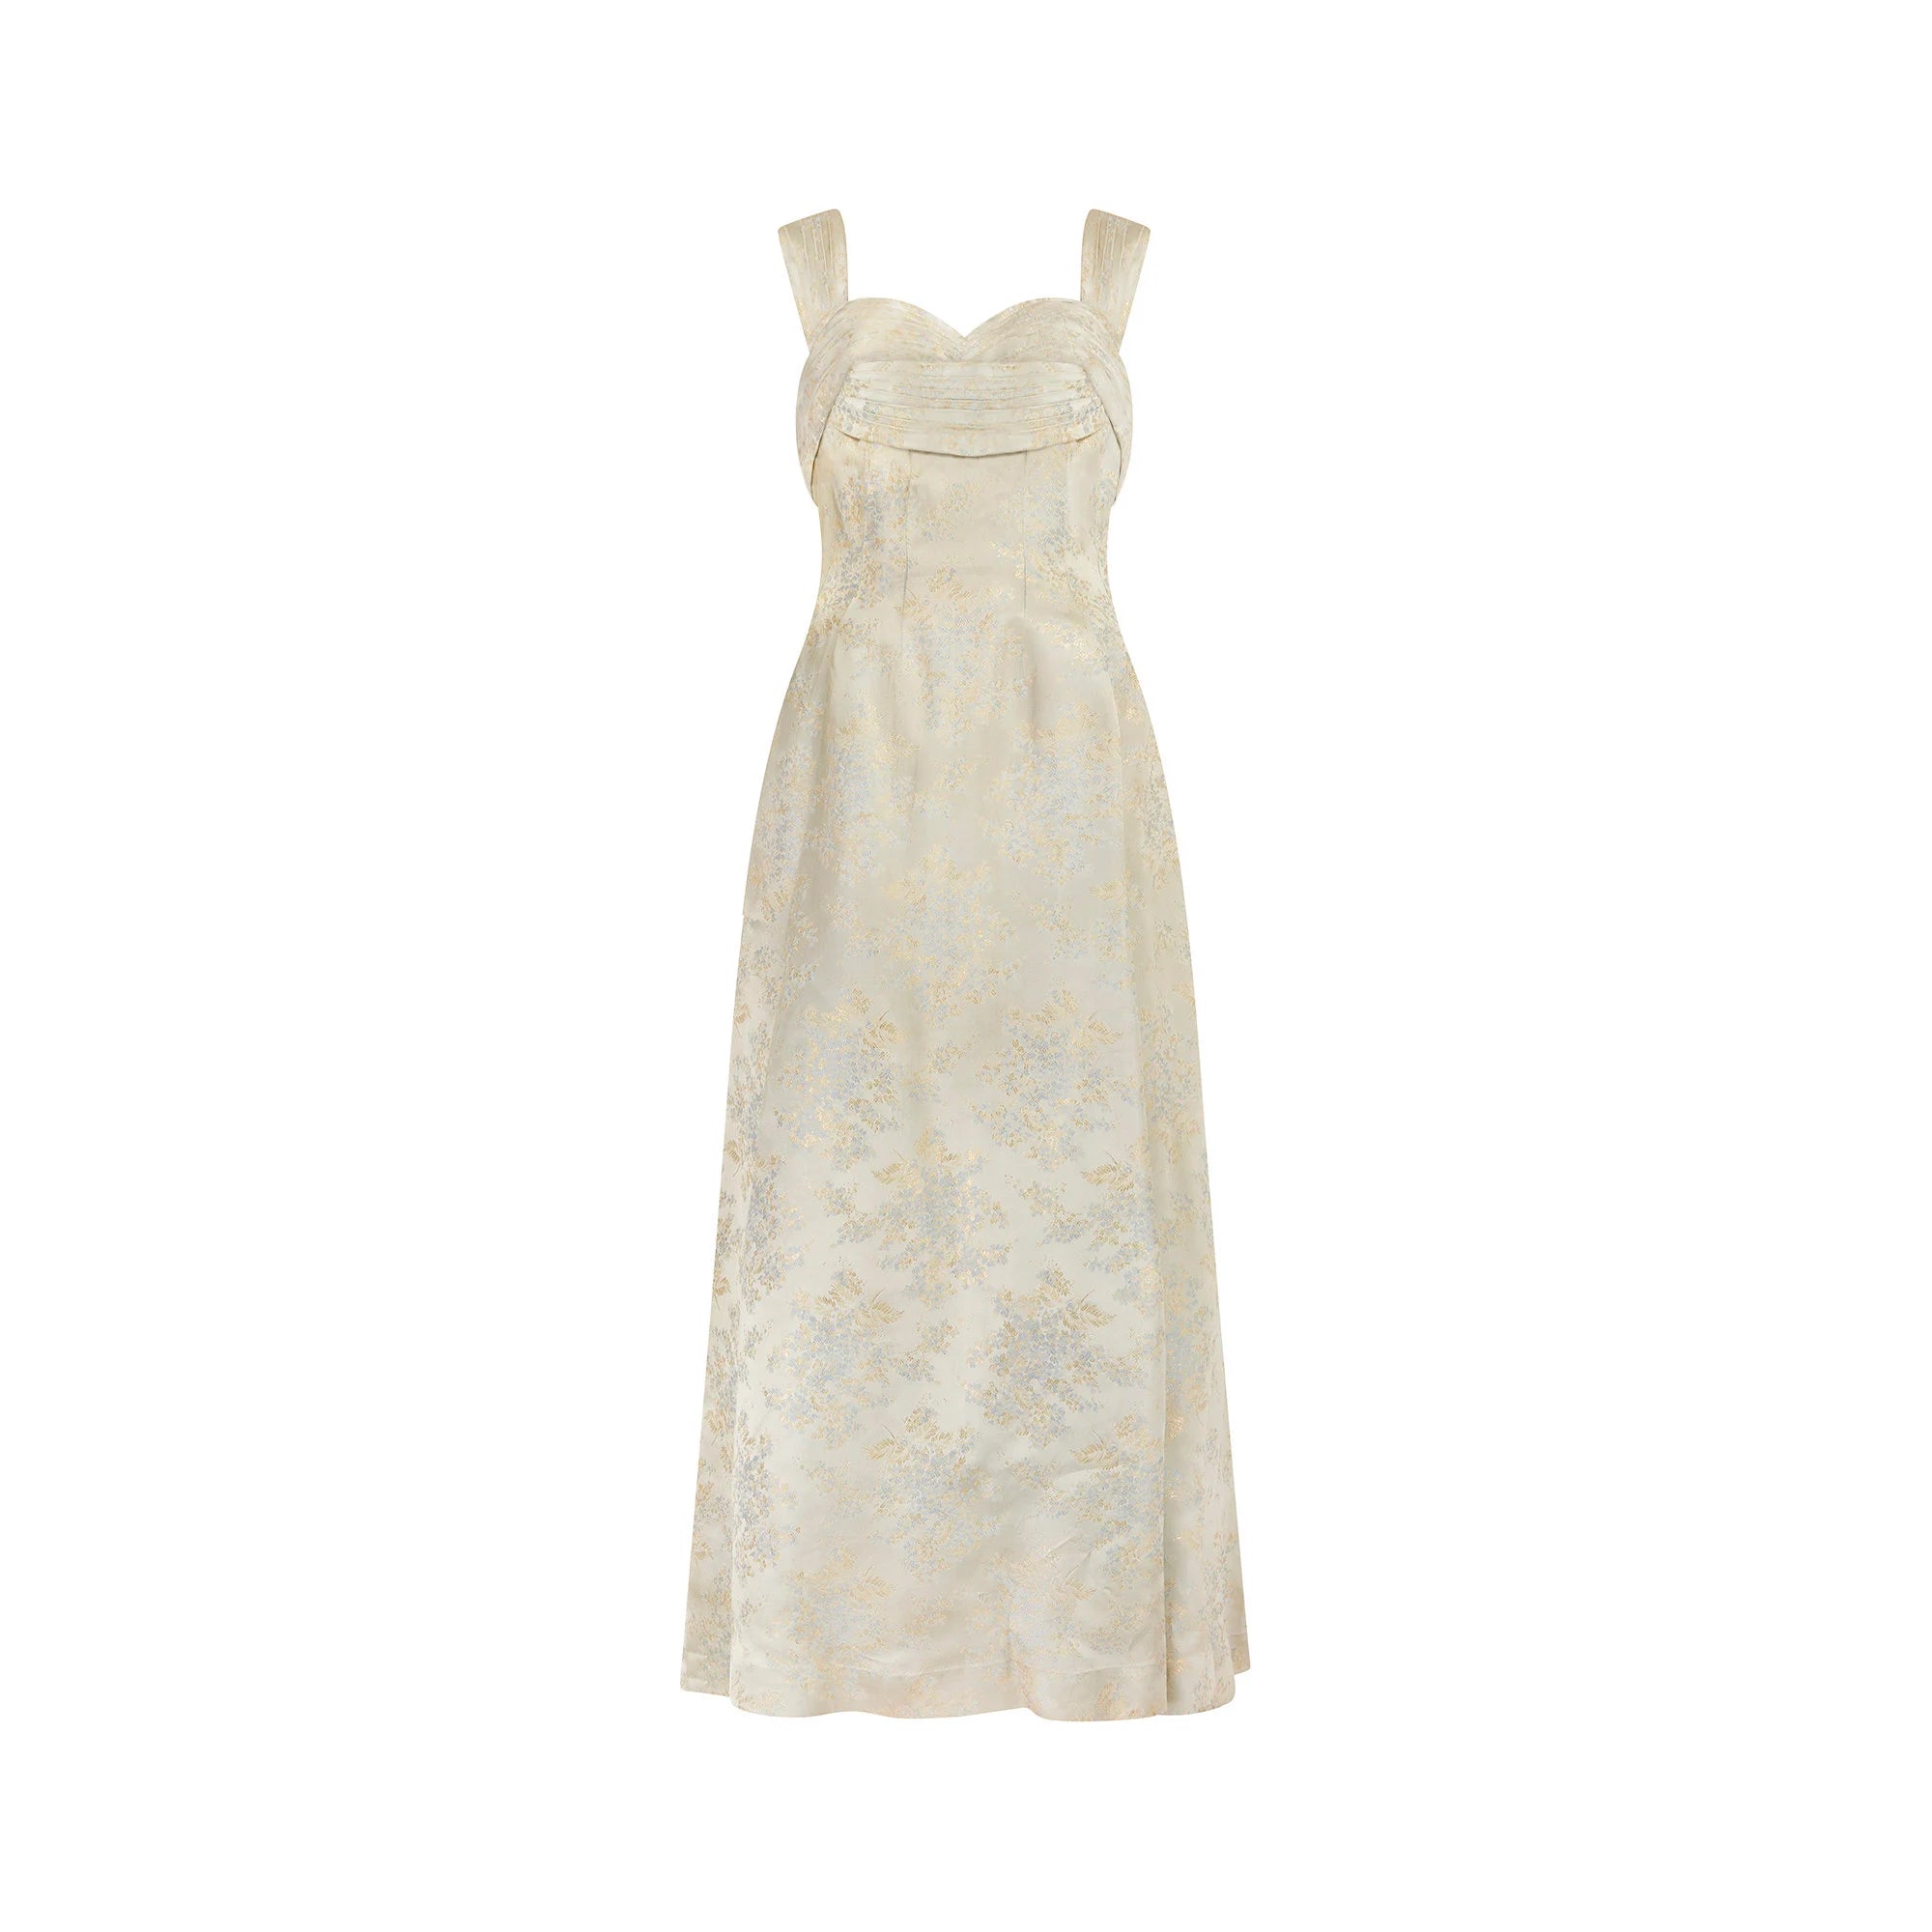 ARCHIVE - 1950s Pale Gold and Blue Brocade Ball Gown